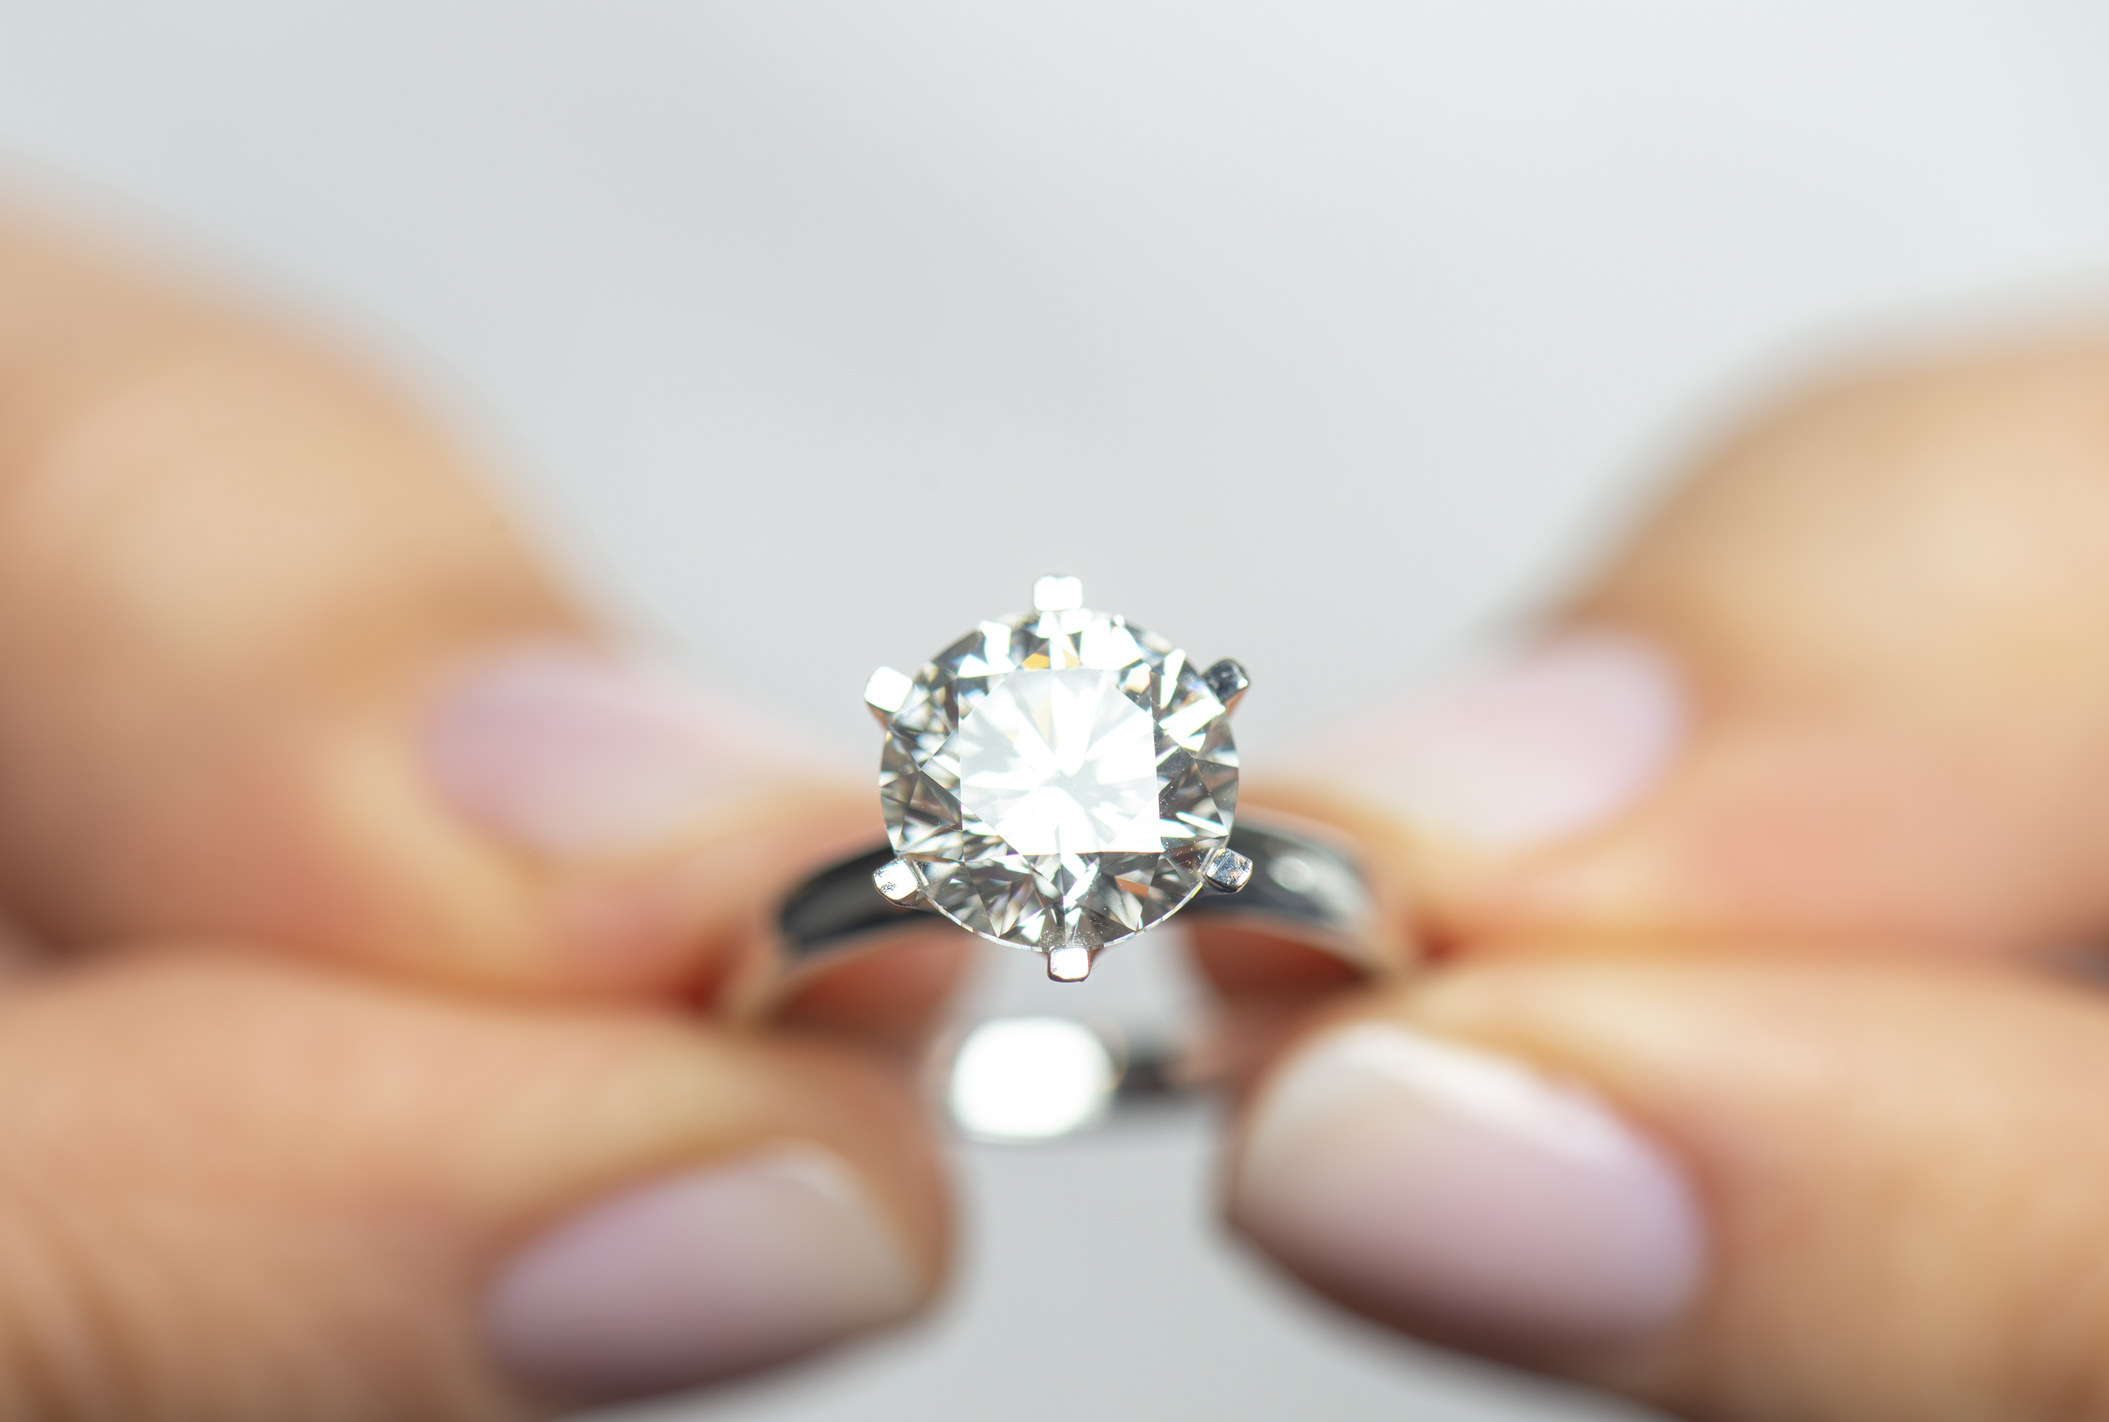 A stock image of a person holding a diamond ring